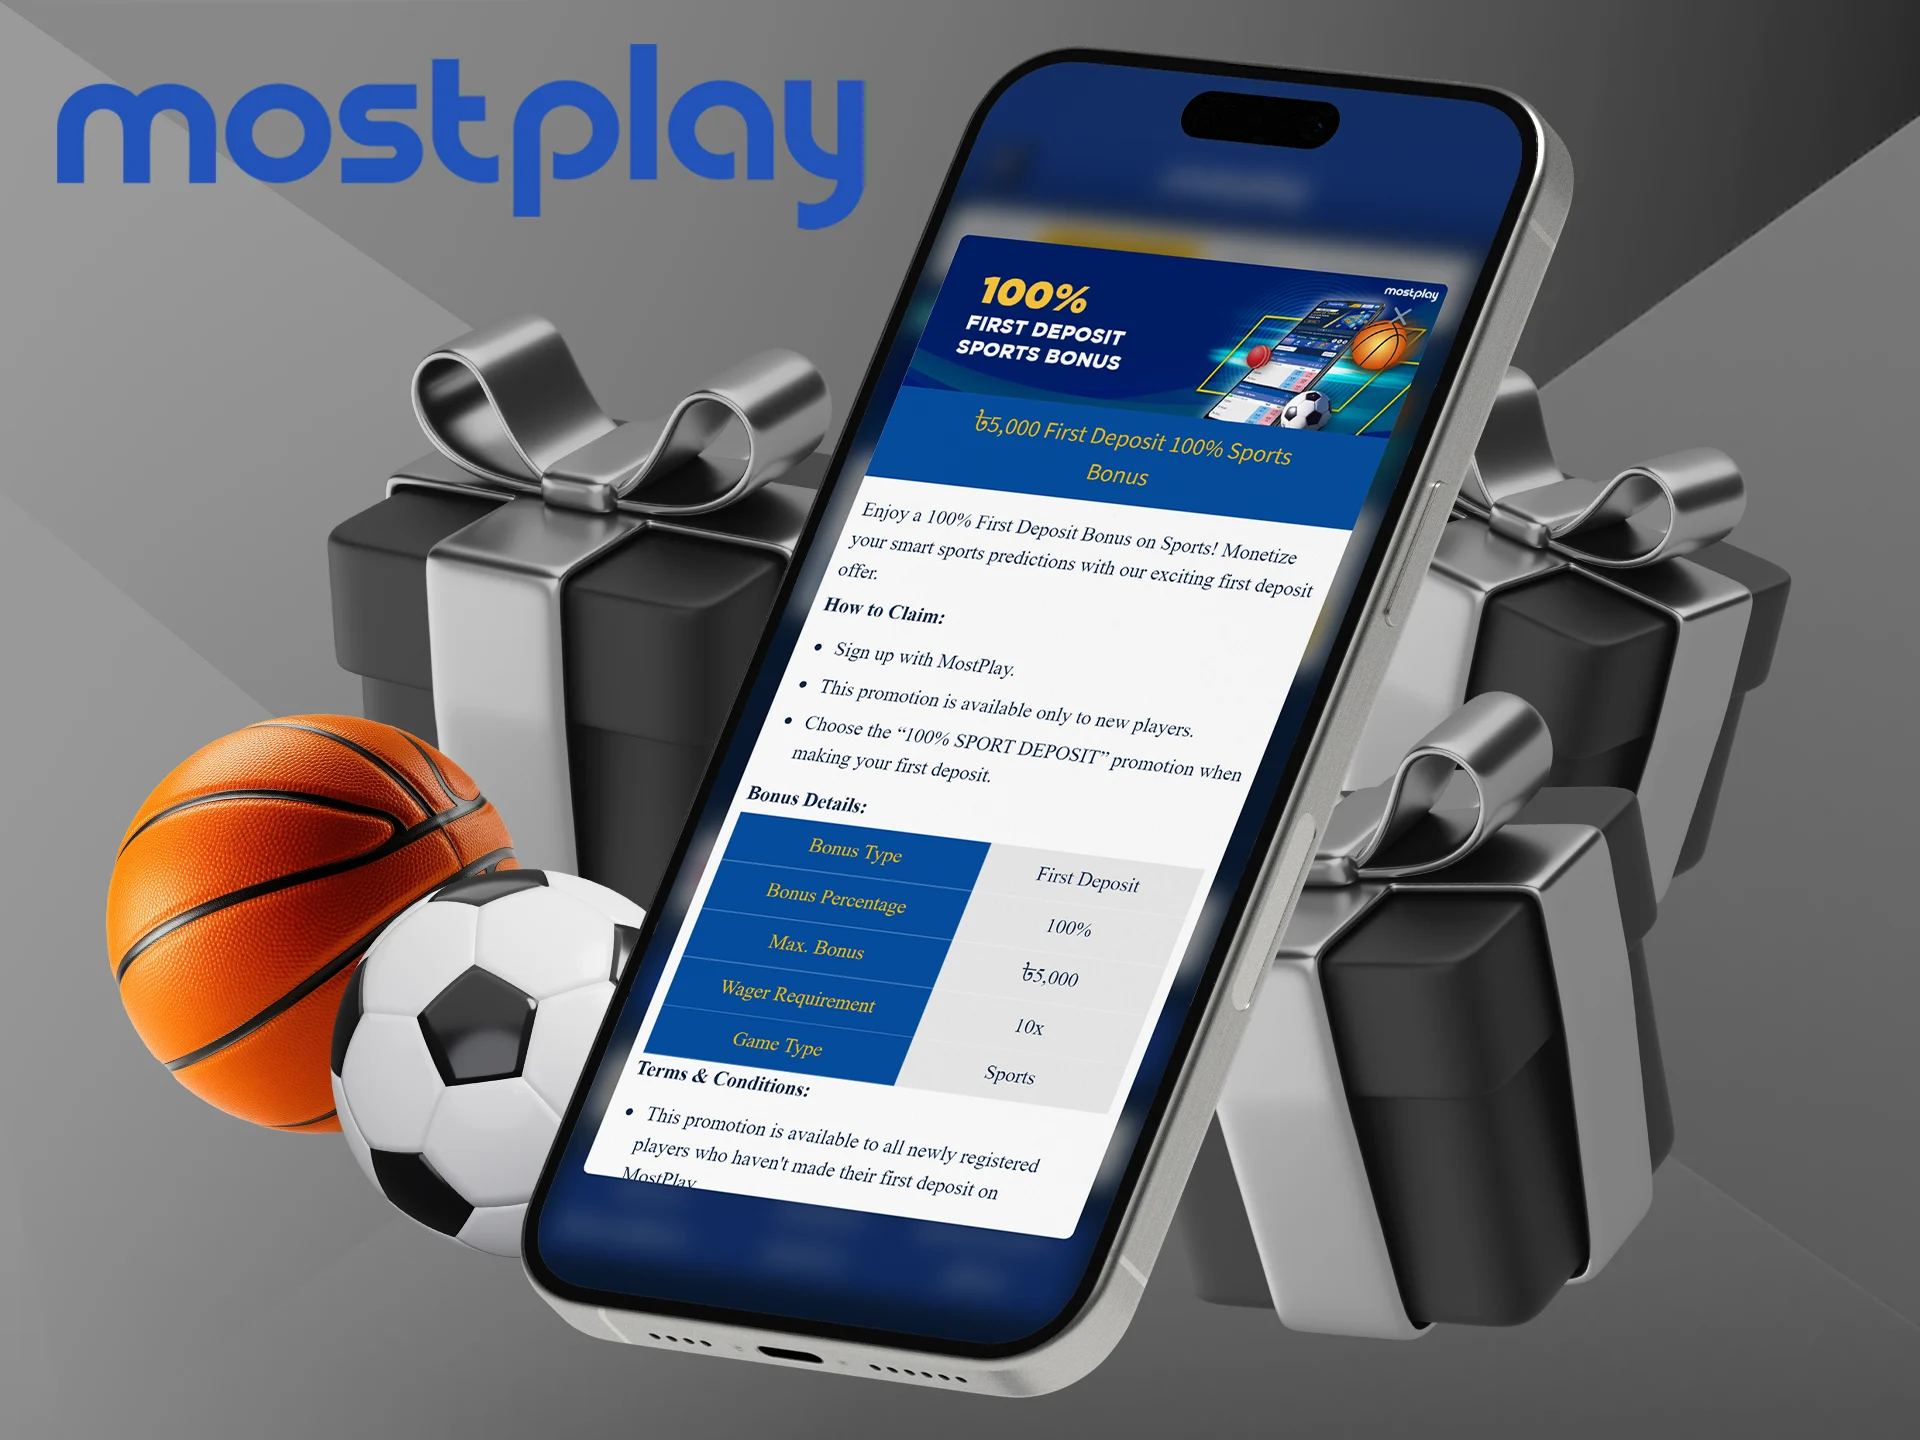 Fund your account and get the Mostplay welcome bonus for sports betting.